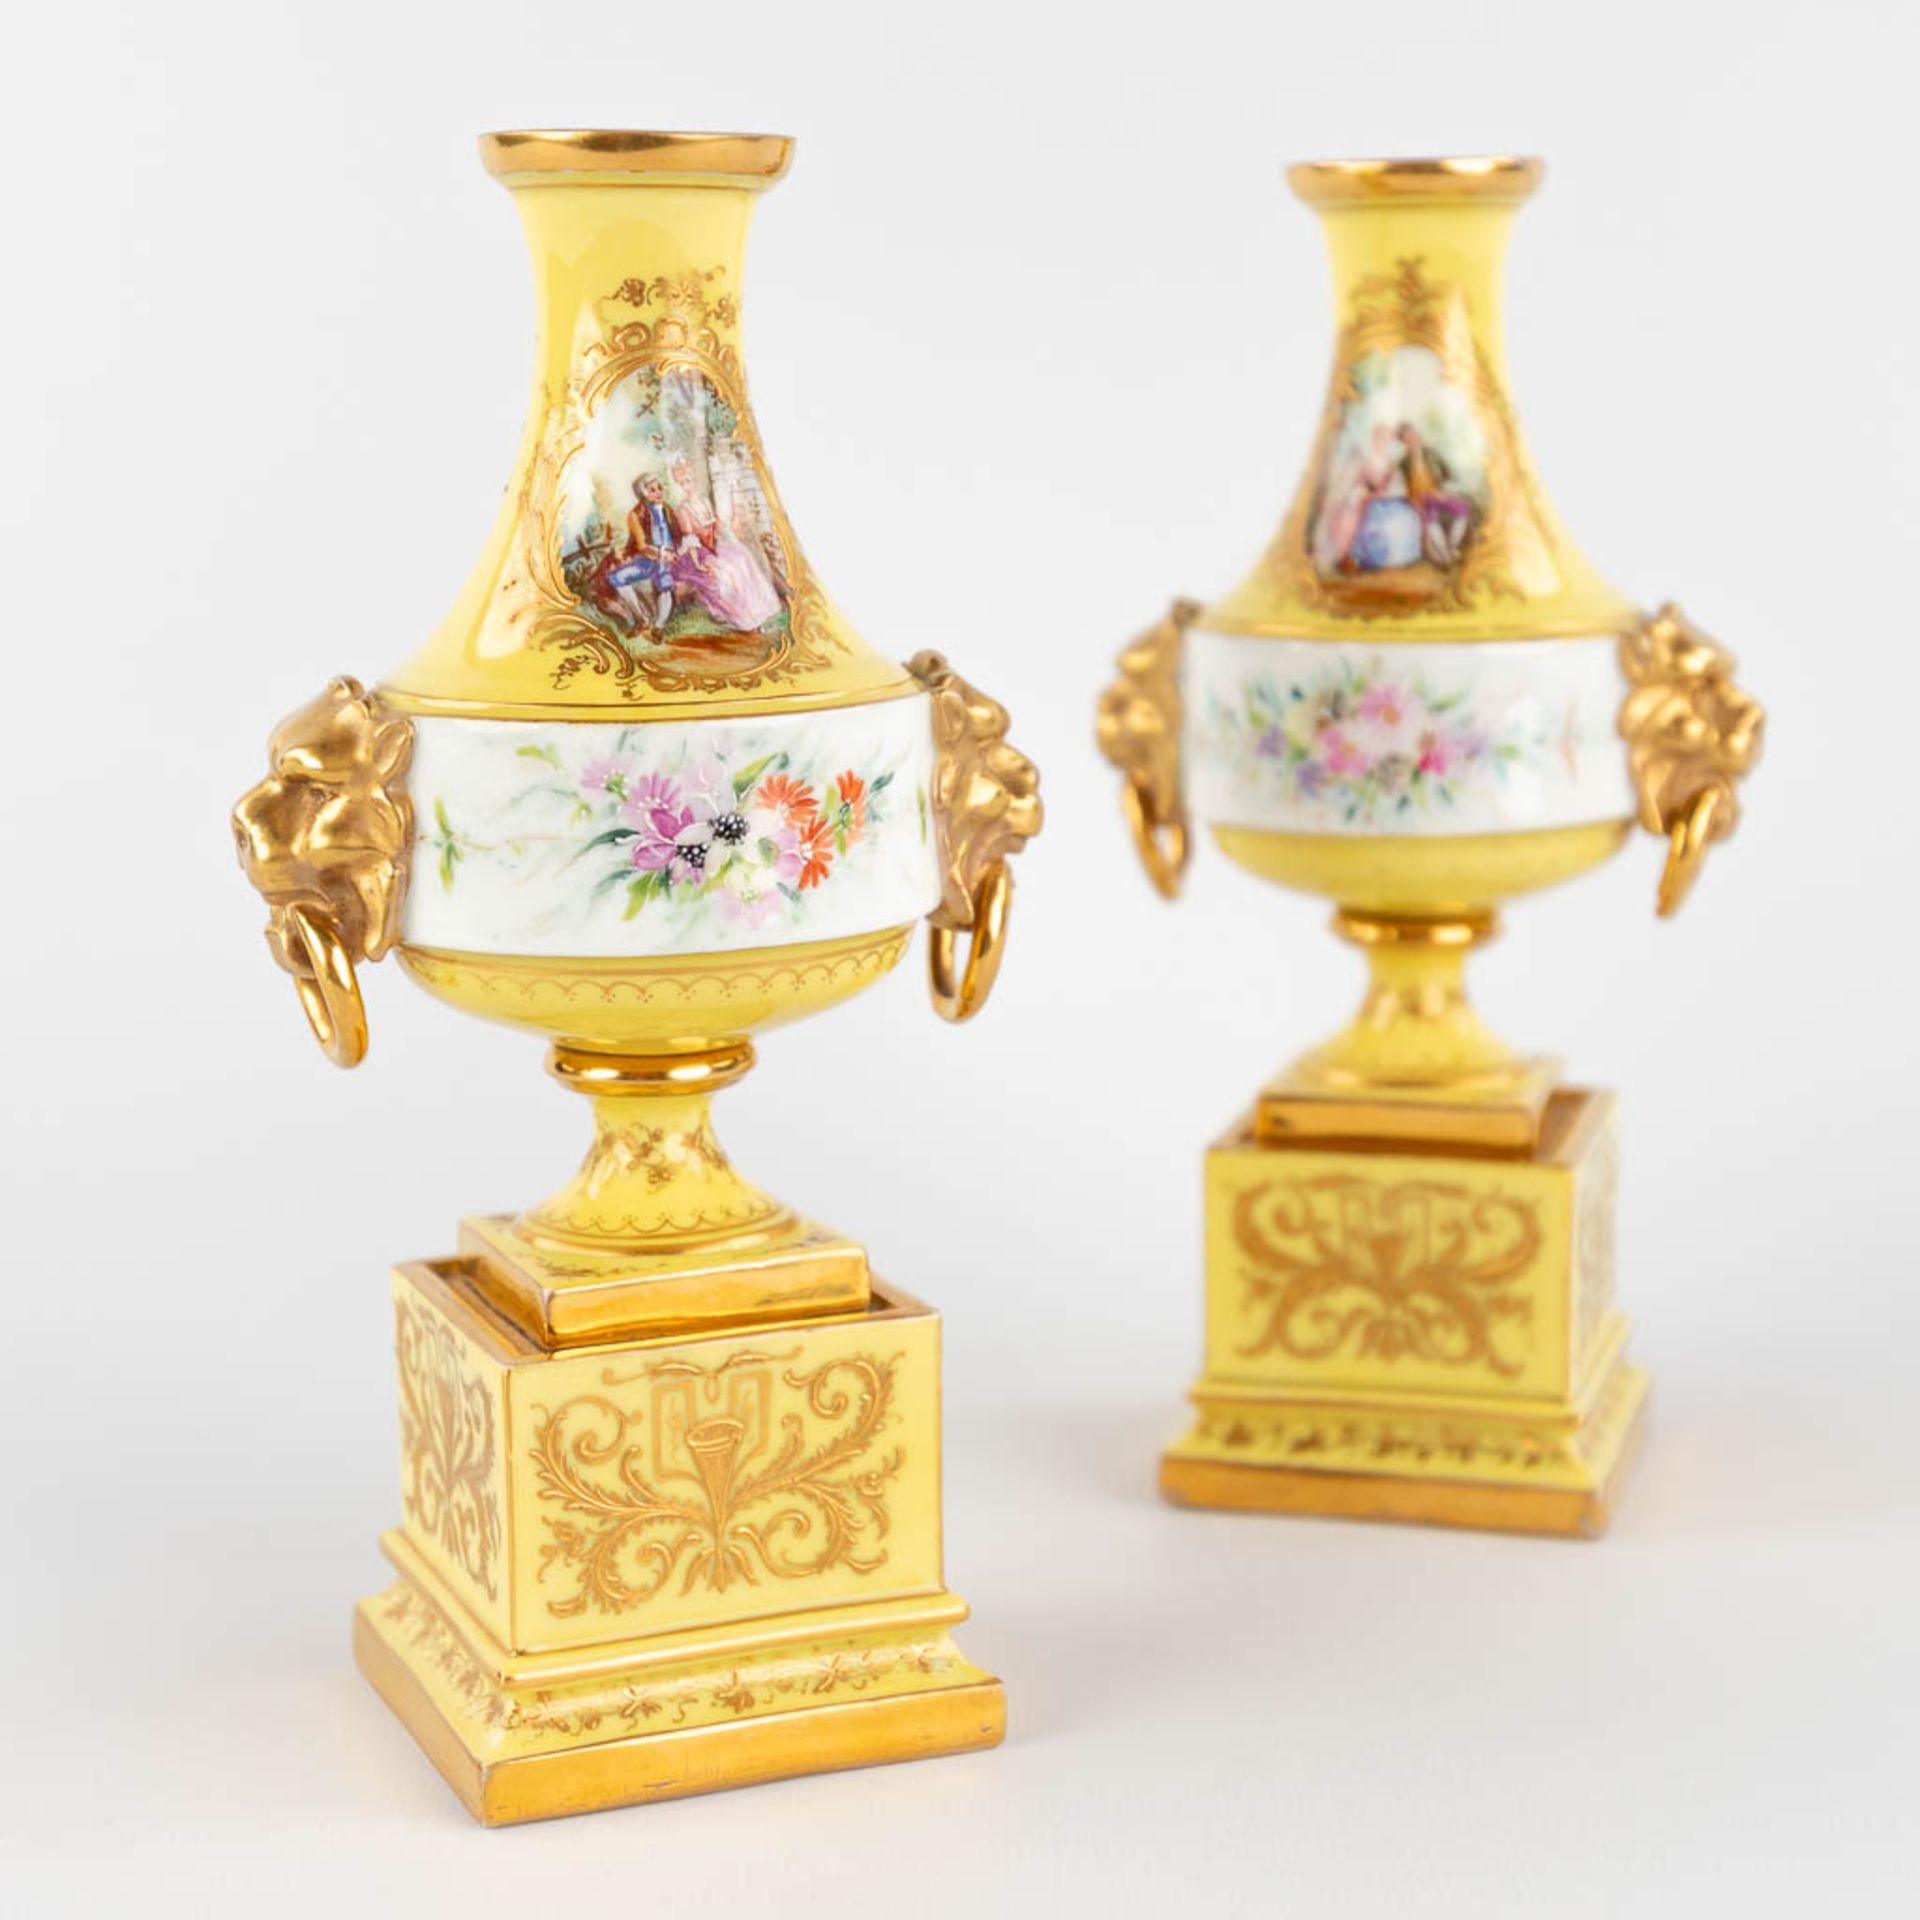 A pair of antique, hand-painted porcelain vases, yellow glaze and flower with lion's heads decor. (L